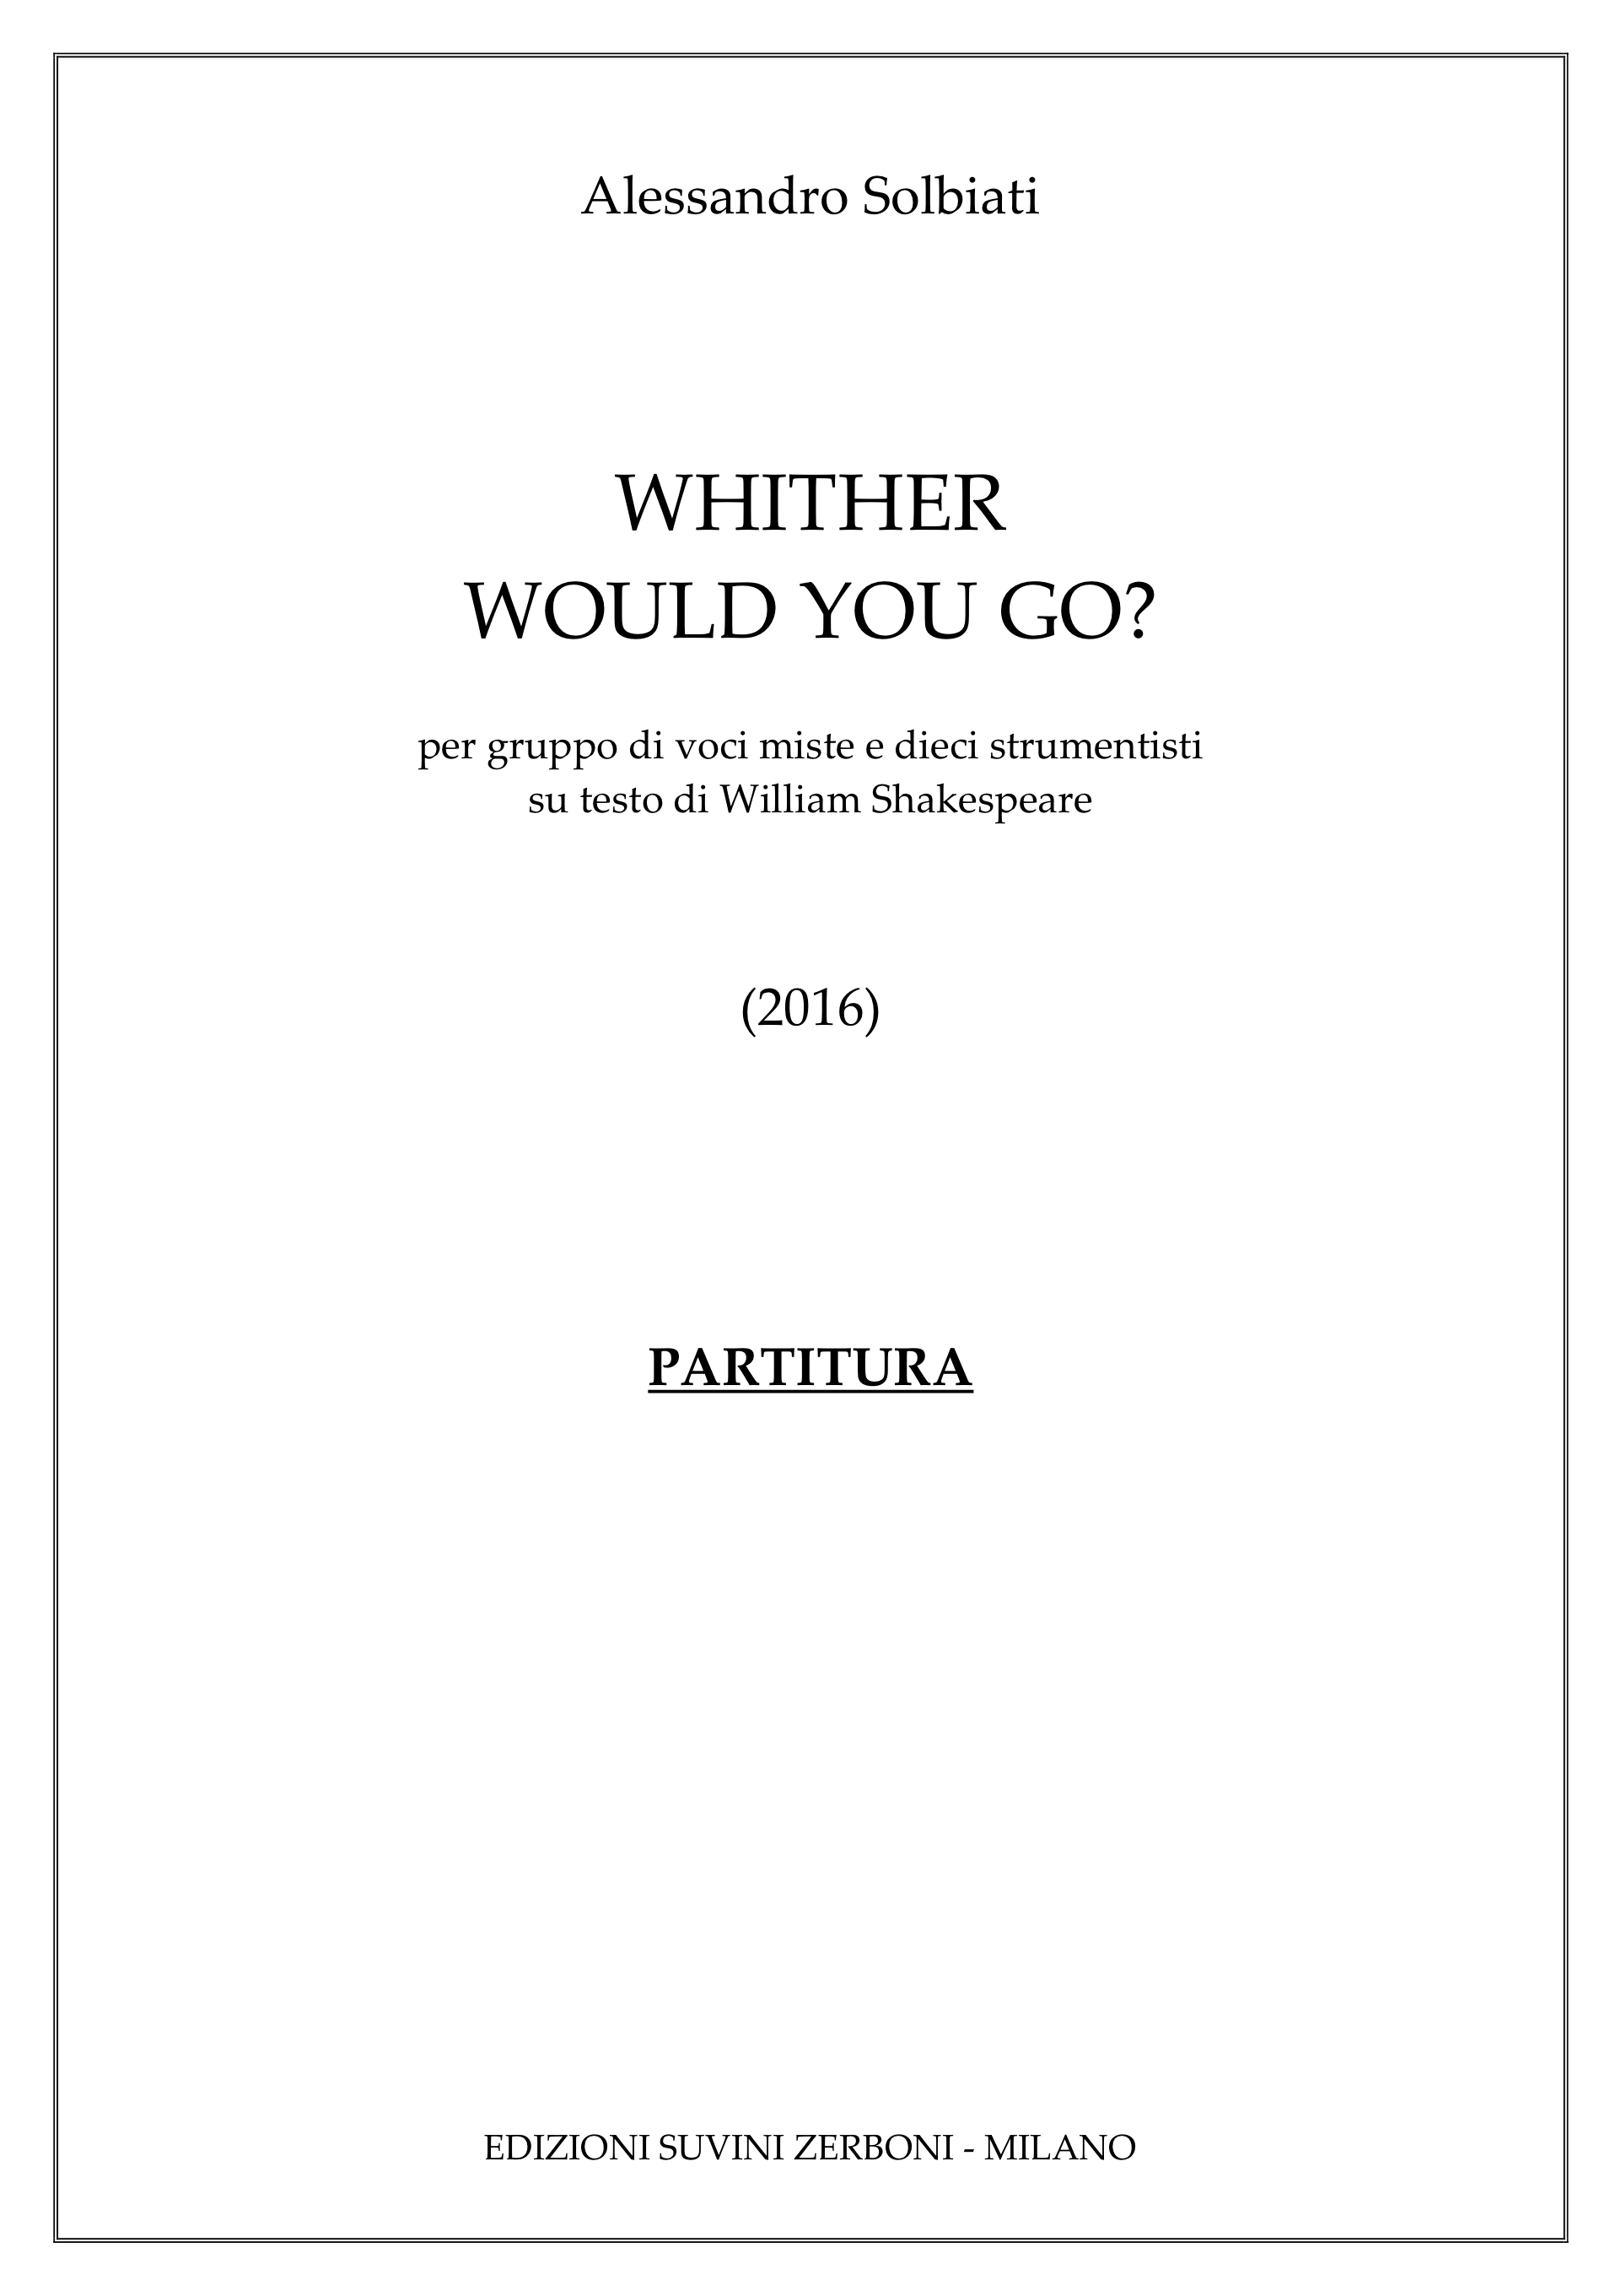 Whither would you go_Solbiati 1